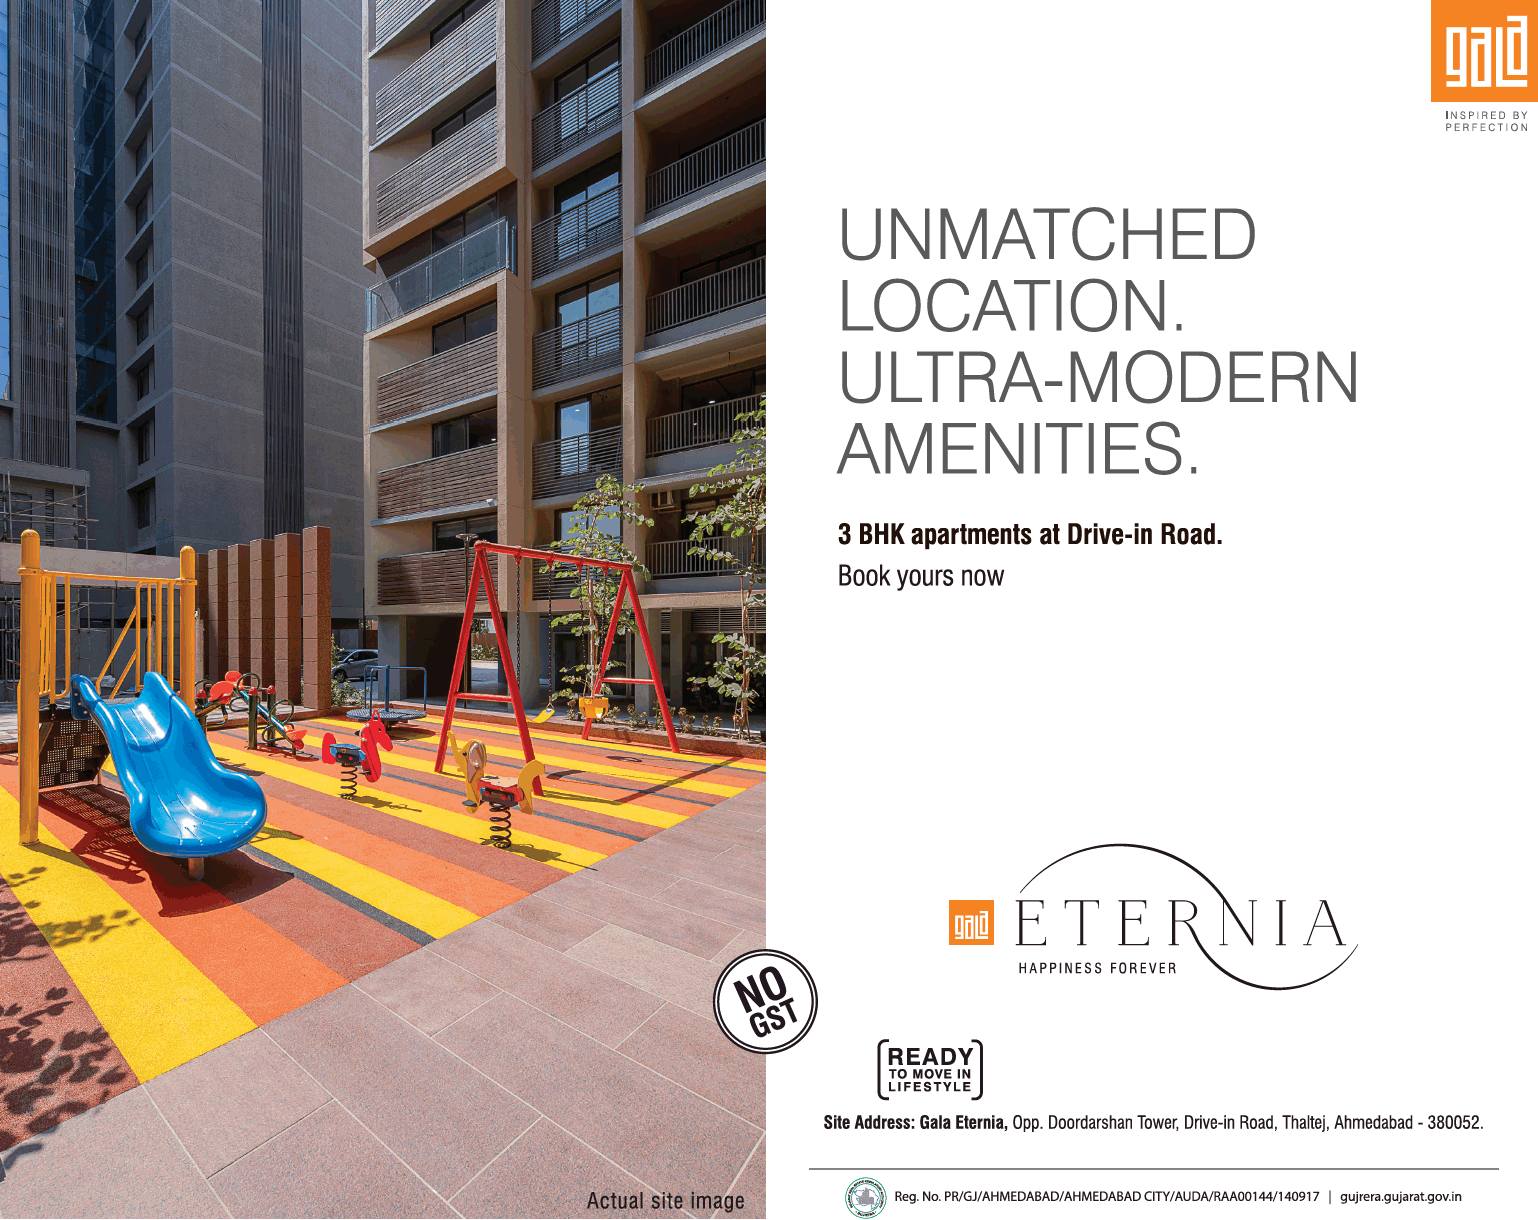 Book 3 BHK homes with no GST at Gala Eternia in Drive In Road, Ahmedabad Update